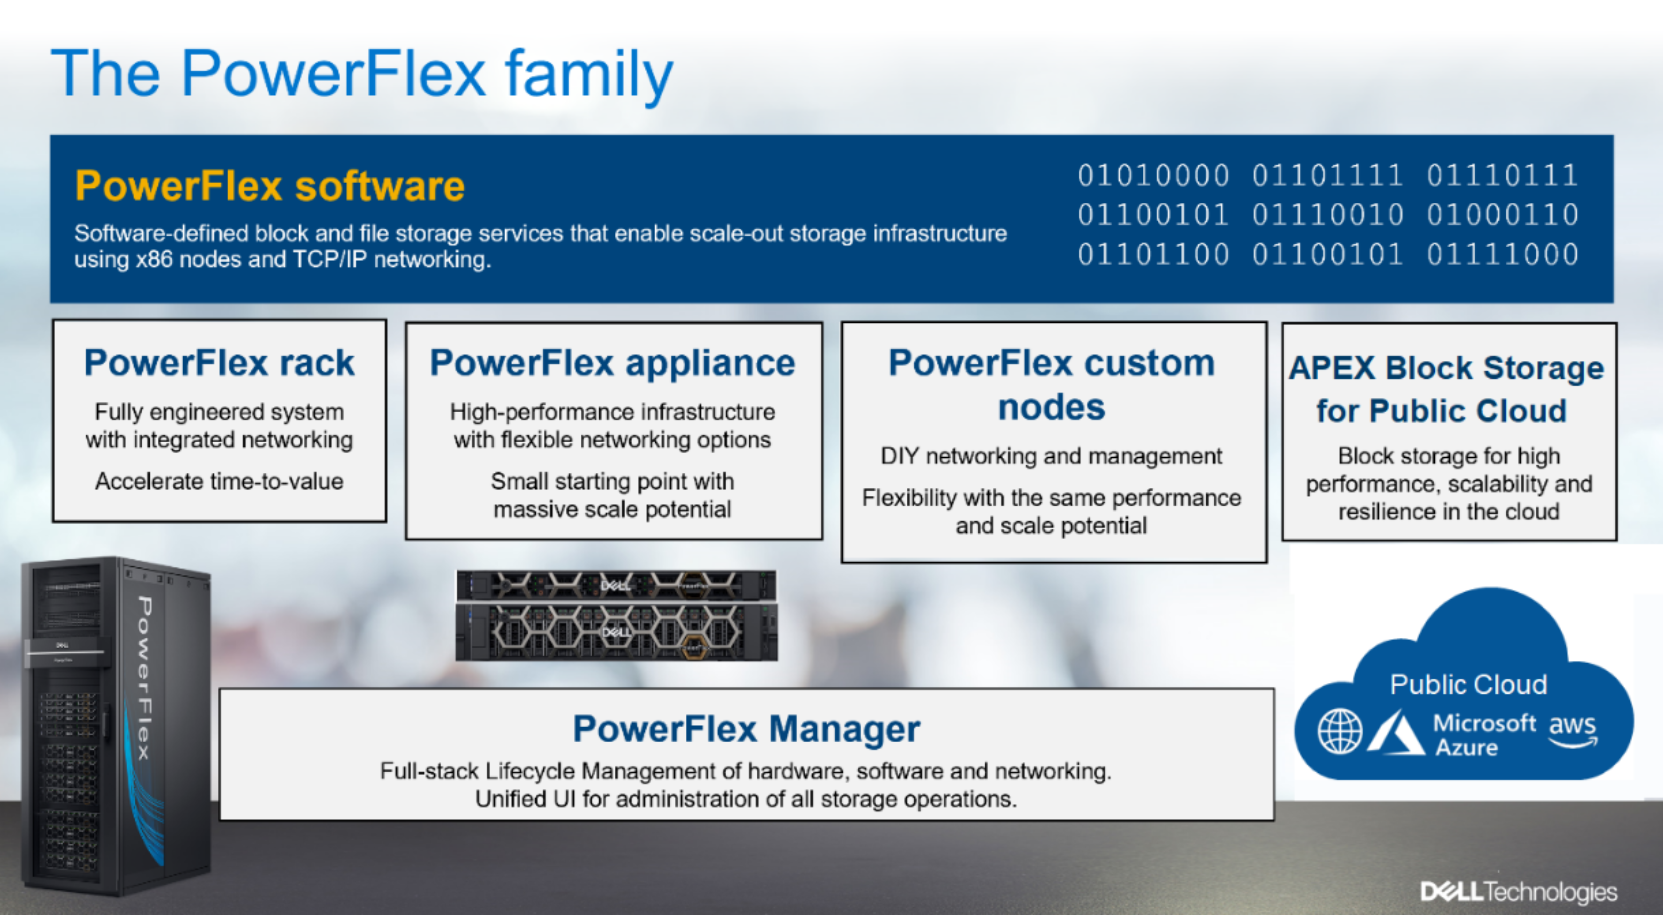 This image shows the powerflex family components.